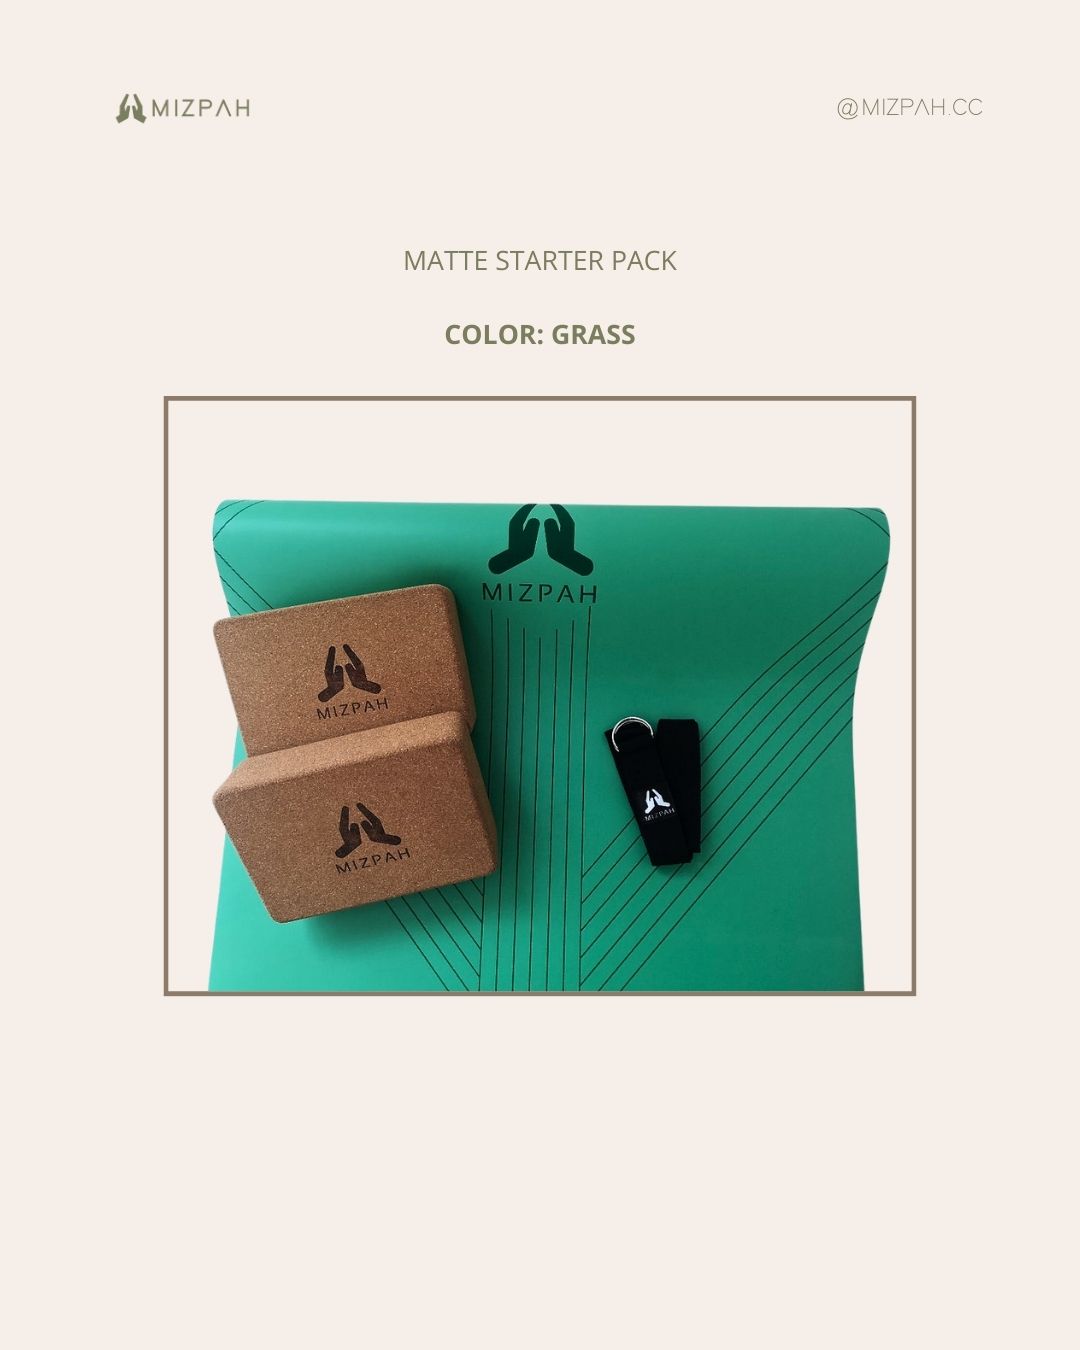 Mizpah's Yoga Starter Pack: A Matte Flow mat with carrying strap, . A pair of cork blocks and a A yoga stretching strap.